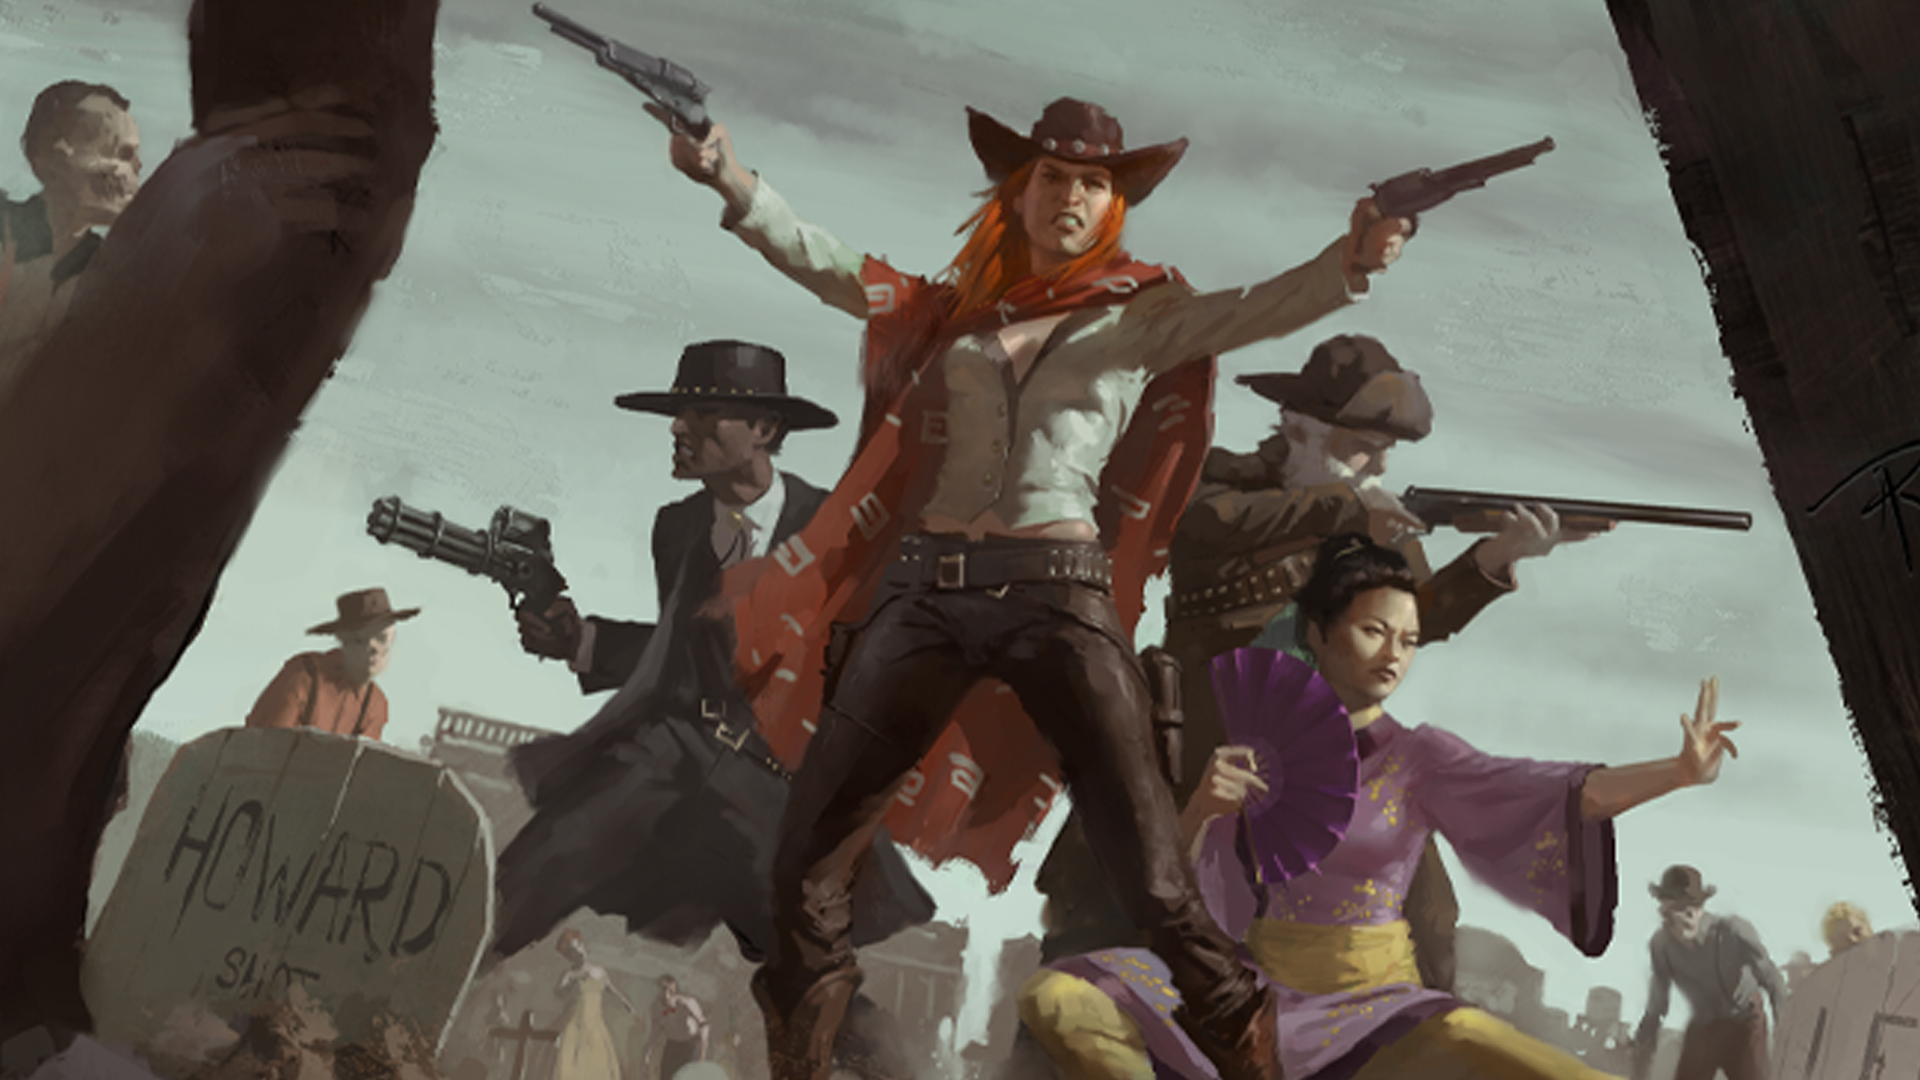 Image for Deadlands’ first big update in 15 years is looking like the best edition of the Weird West RPG yet - Kickstarter preview